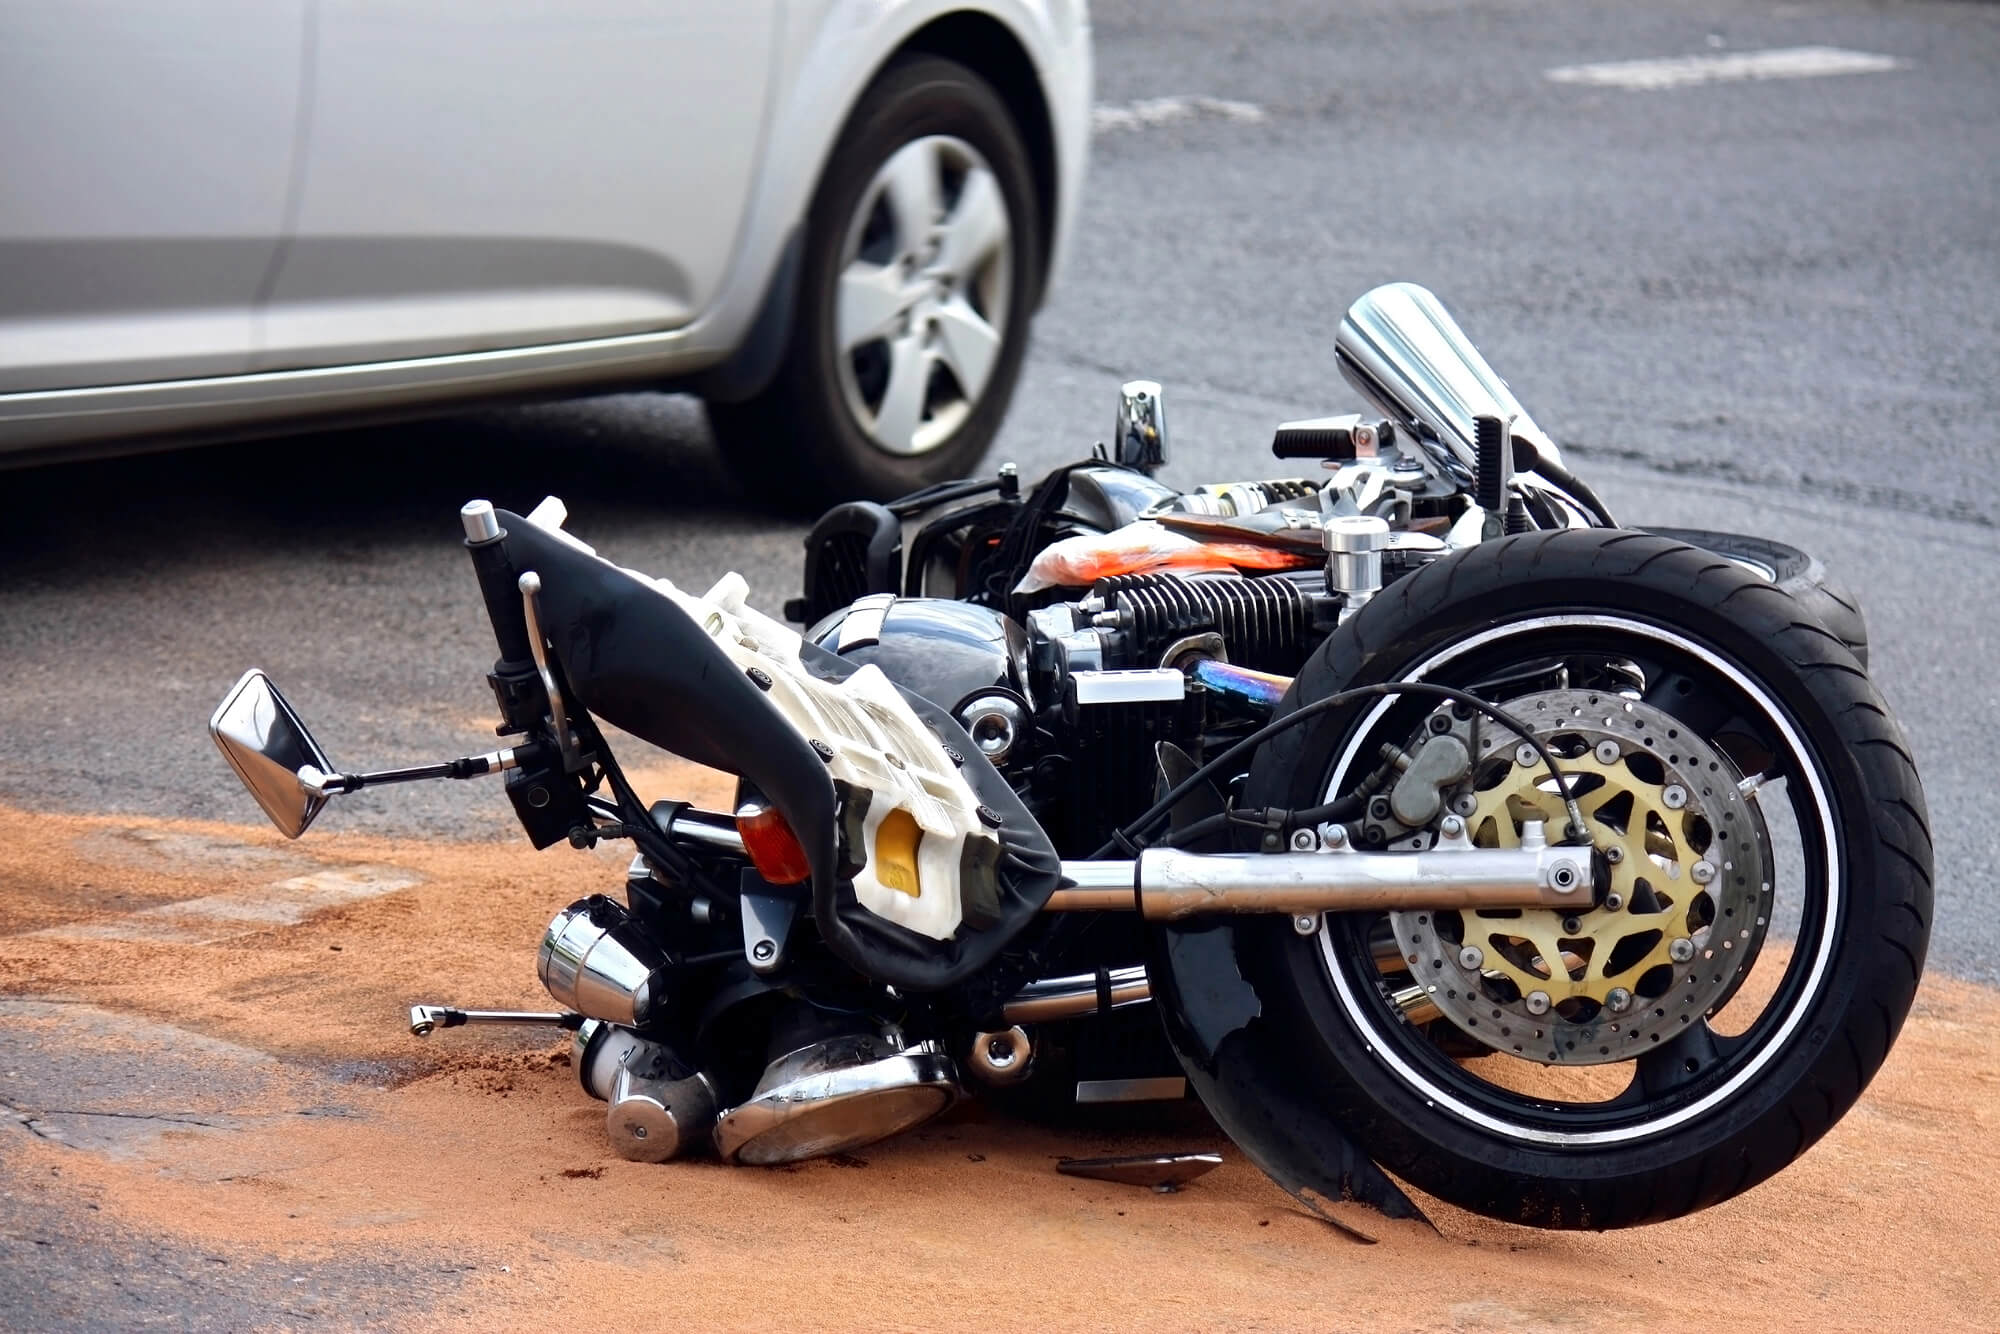 What to do After a Sacramento Motorcycle Accident